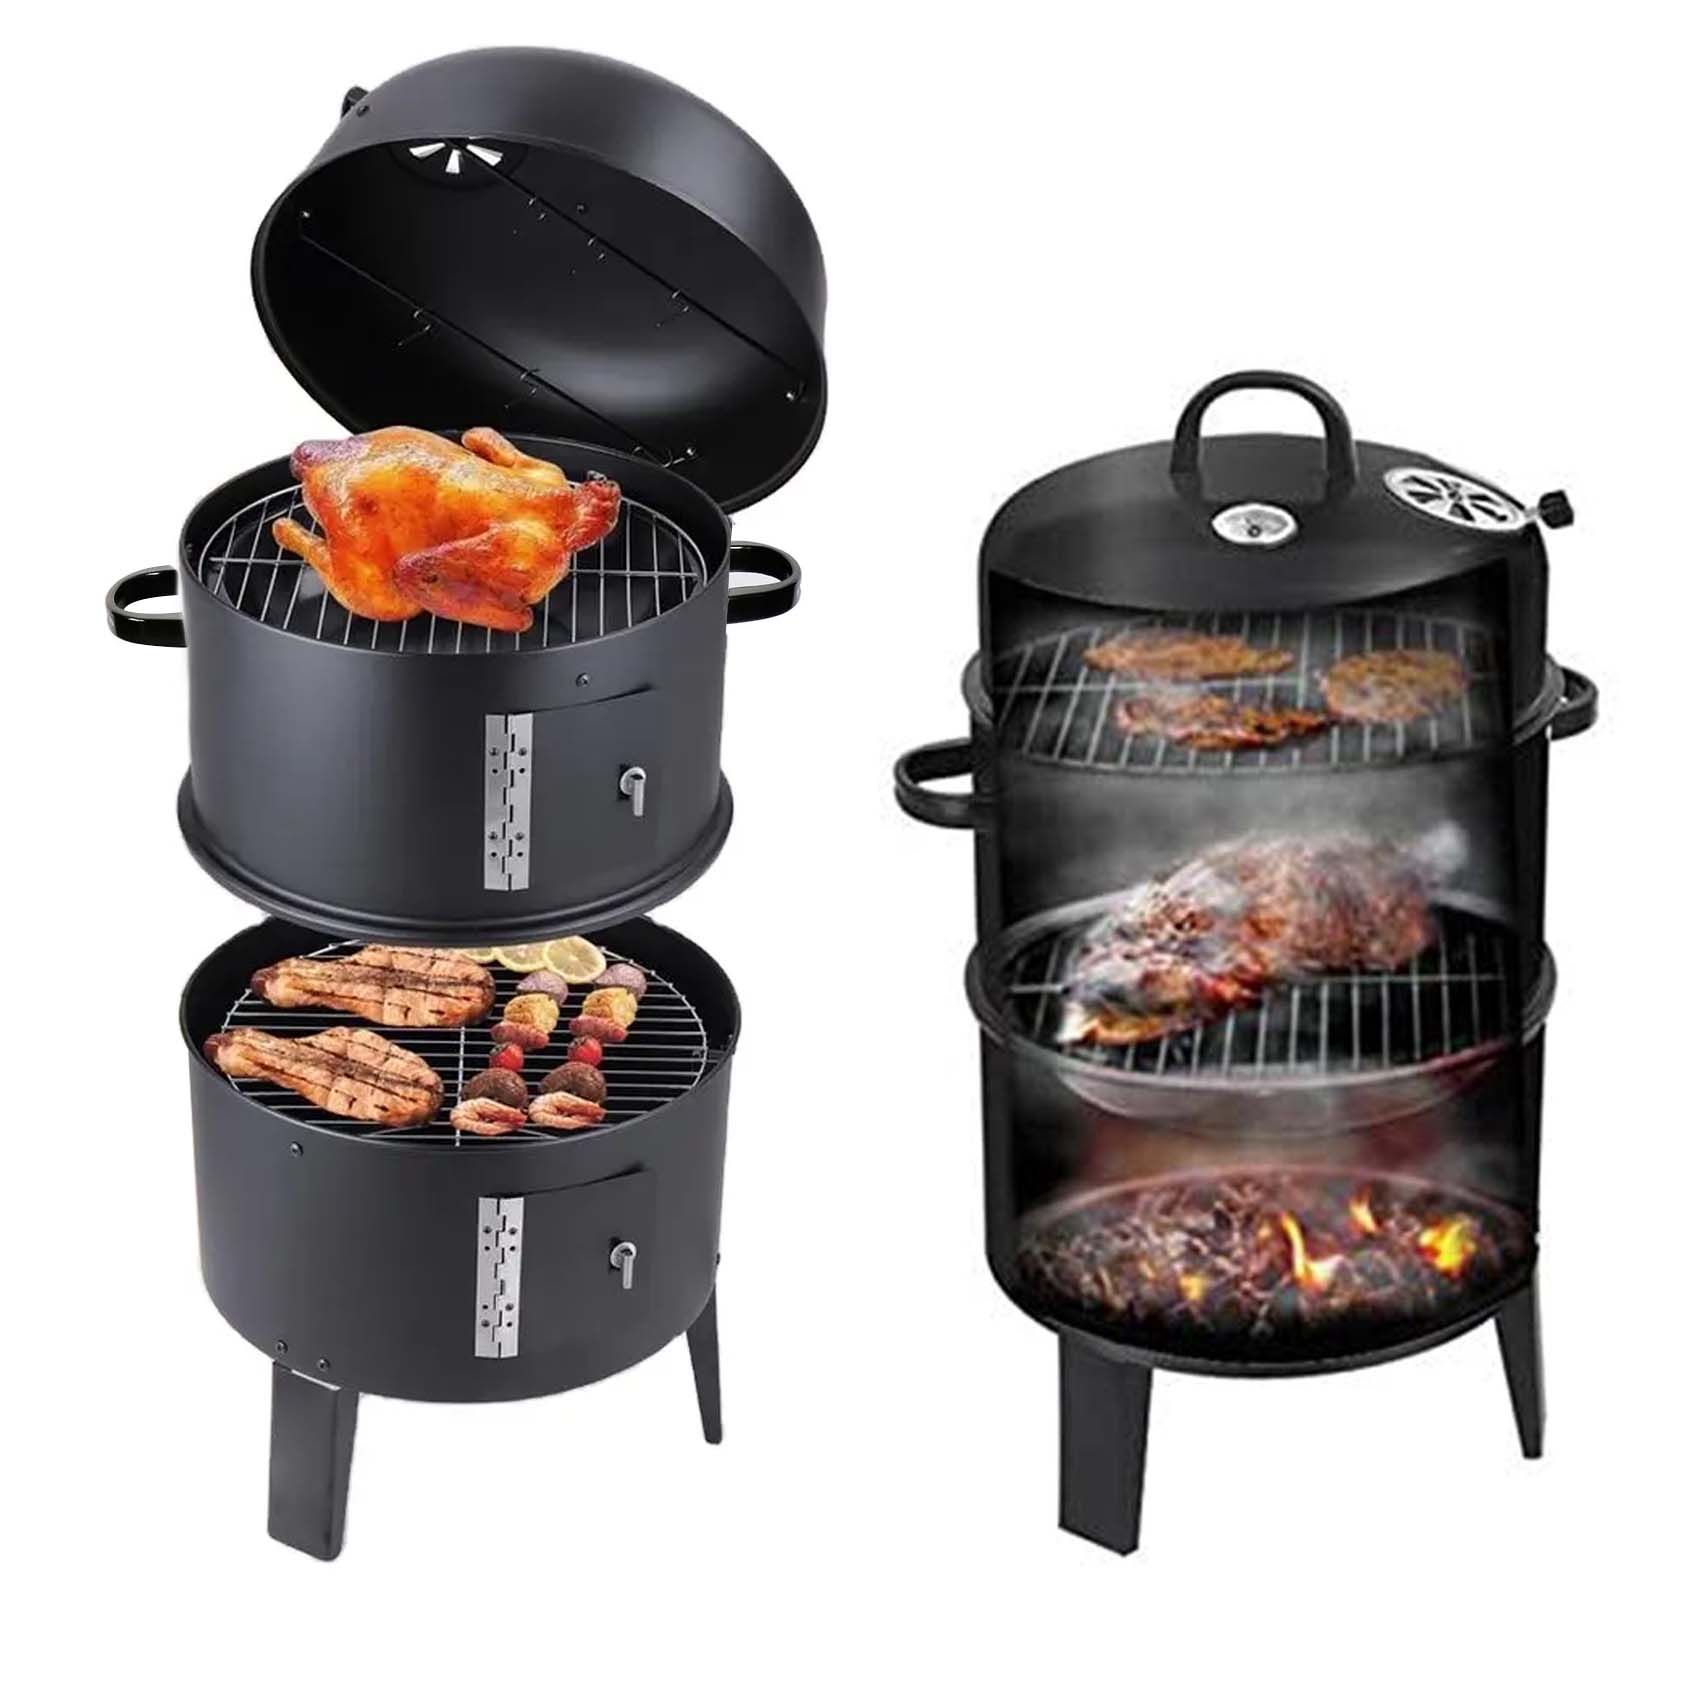 CAMPMATE PORTABLE BARREL BBQ GRILL 3 in 1 SMOKER - OVEN - GRILL WITH THERMOMETER CM-6999